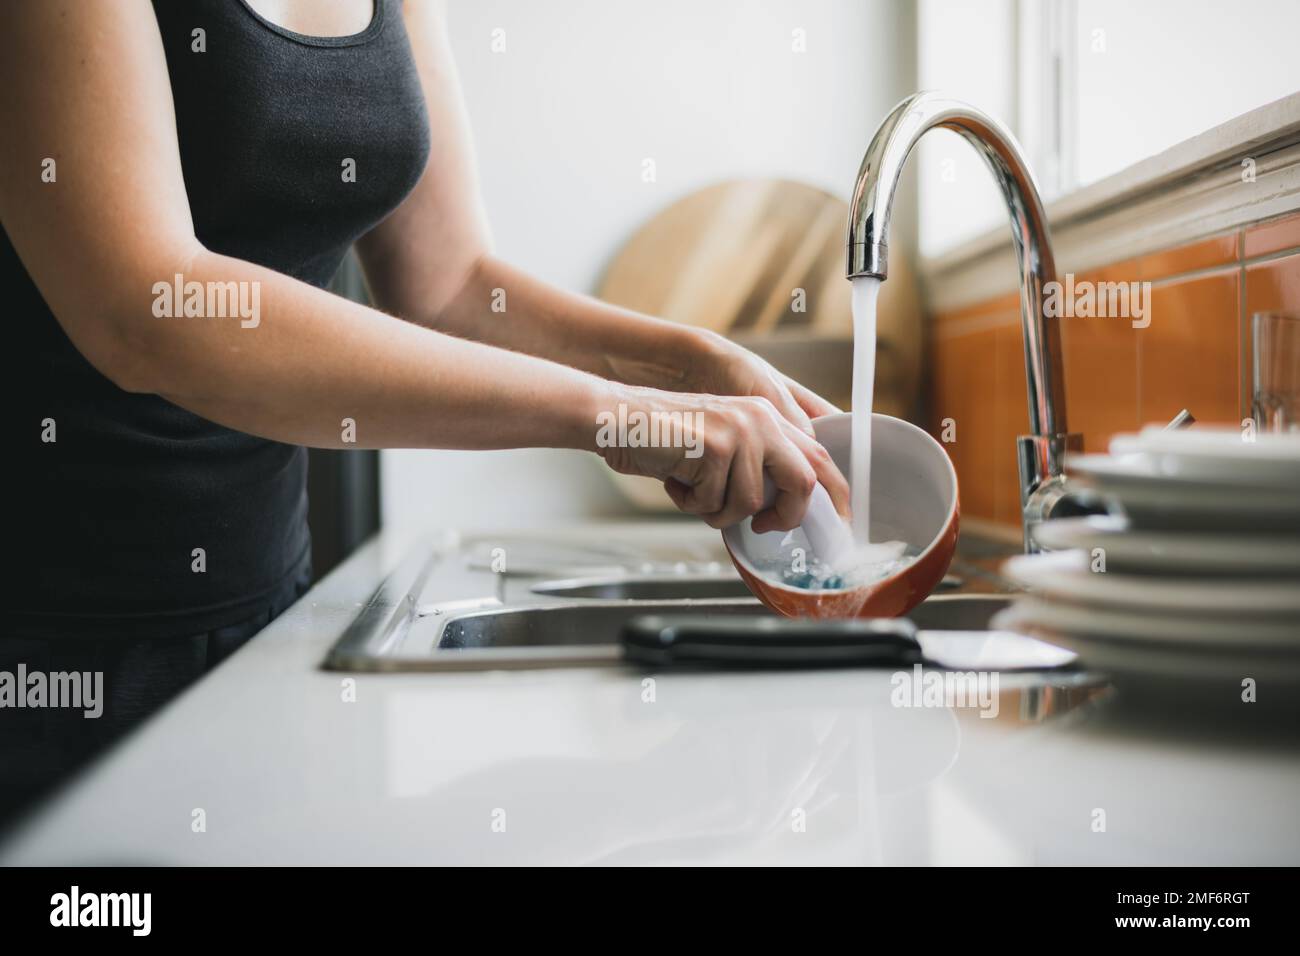 Woman washing dishes in kitchen sink, close up of hands and scrubbing brush with water running Stock Photo